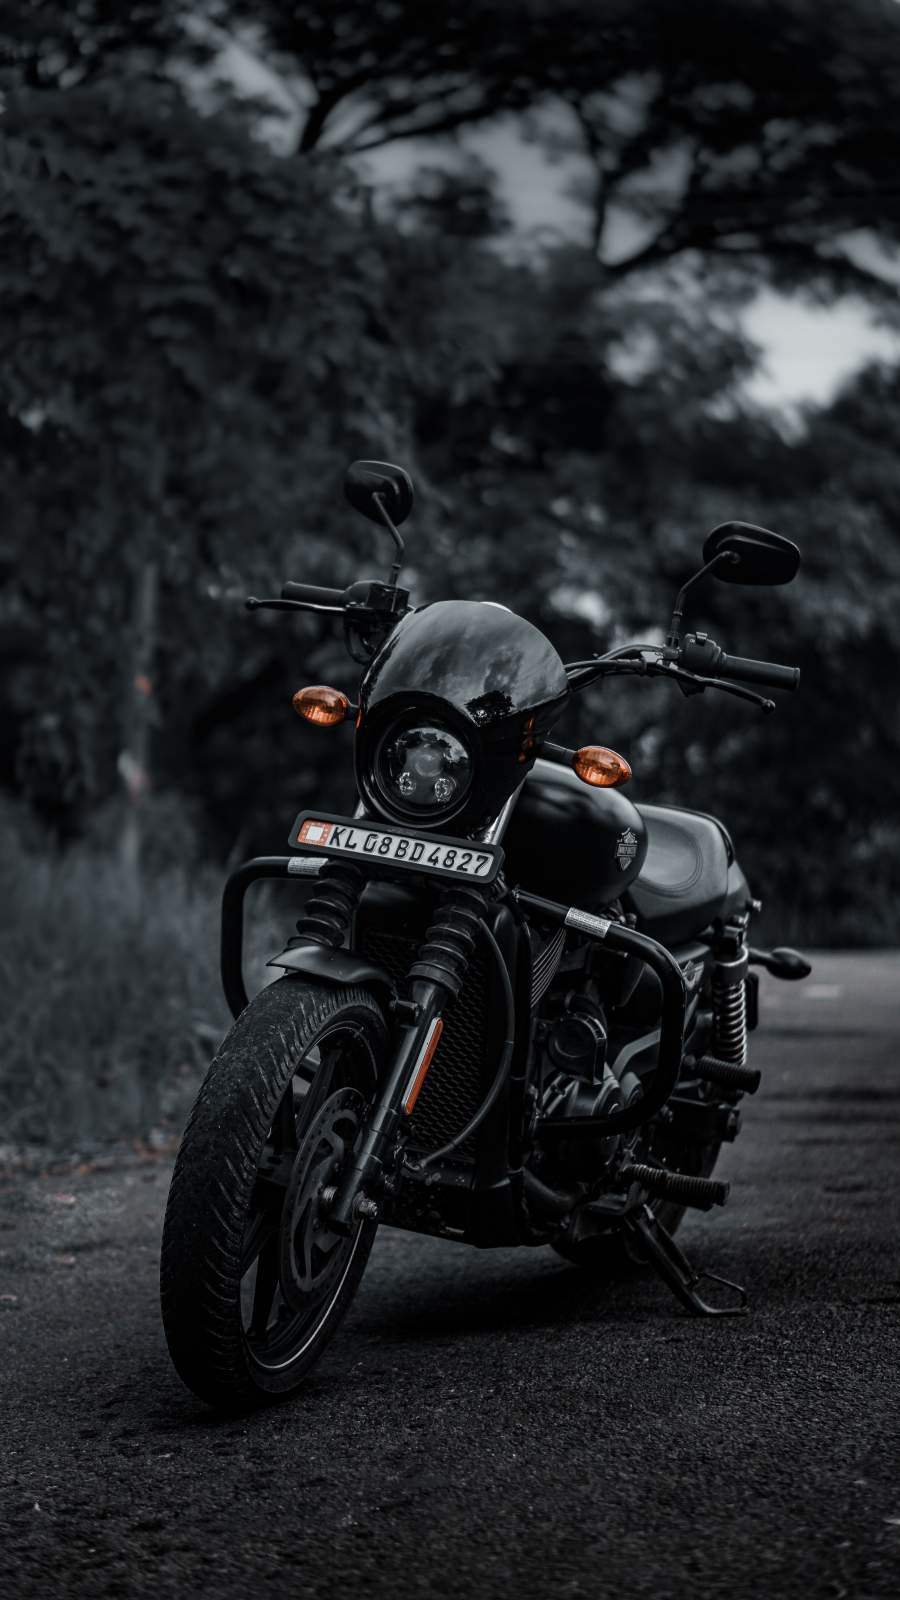 Harley Softail iPhone Wallpapers  Harley davidson artwork Harley davidson  wallpaper Harley d